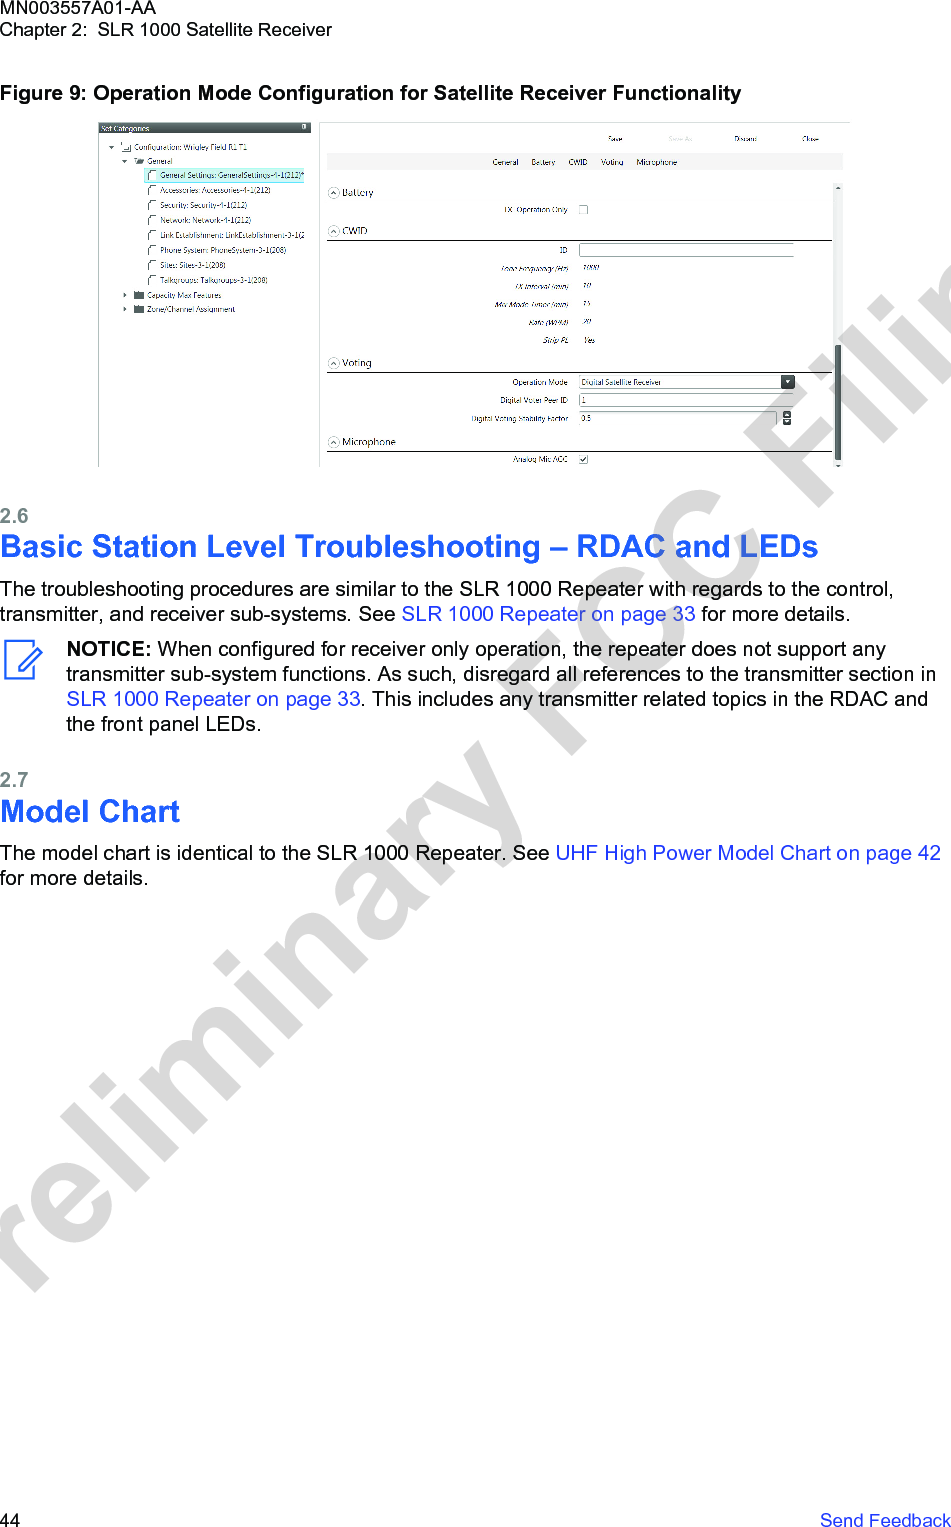 Figure 9: Operation Mode Configuration for Satellite Receiver Functionality2.6Basic Station Level Troubleshooting – RDAC and LEDsThe troubleshooting procedures are similar to the SLR 1000 Repeater with regards to the control,transmitter, and receiver sub-systems. See SLR 1000 Repeater on page 33 for more details.NOTICE: When configured for receiver only operation, the repeater does not support anytransmitter sub-system functions. As such, disregard all references to the transmitter section in SLR 1000 Repeater on page 33. This includes any transmitter related topics in the RDAC andthe front panel LEDs.2.7Model ChartThe model chart is identical to the SLR 1000 Repeater. See UHF High Power Model Chart on page 42for more details.MN003557A01-AAChapter 2:  SLR 1000 Satellite Receiver44   Send FeedbackPreliminary FCC Filing